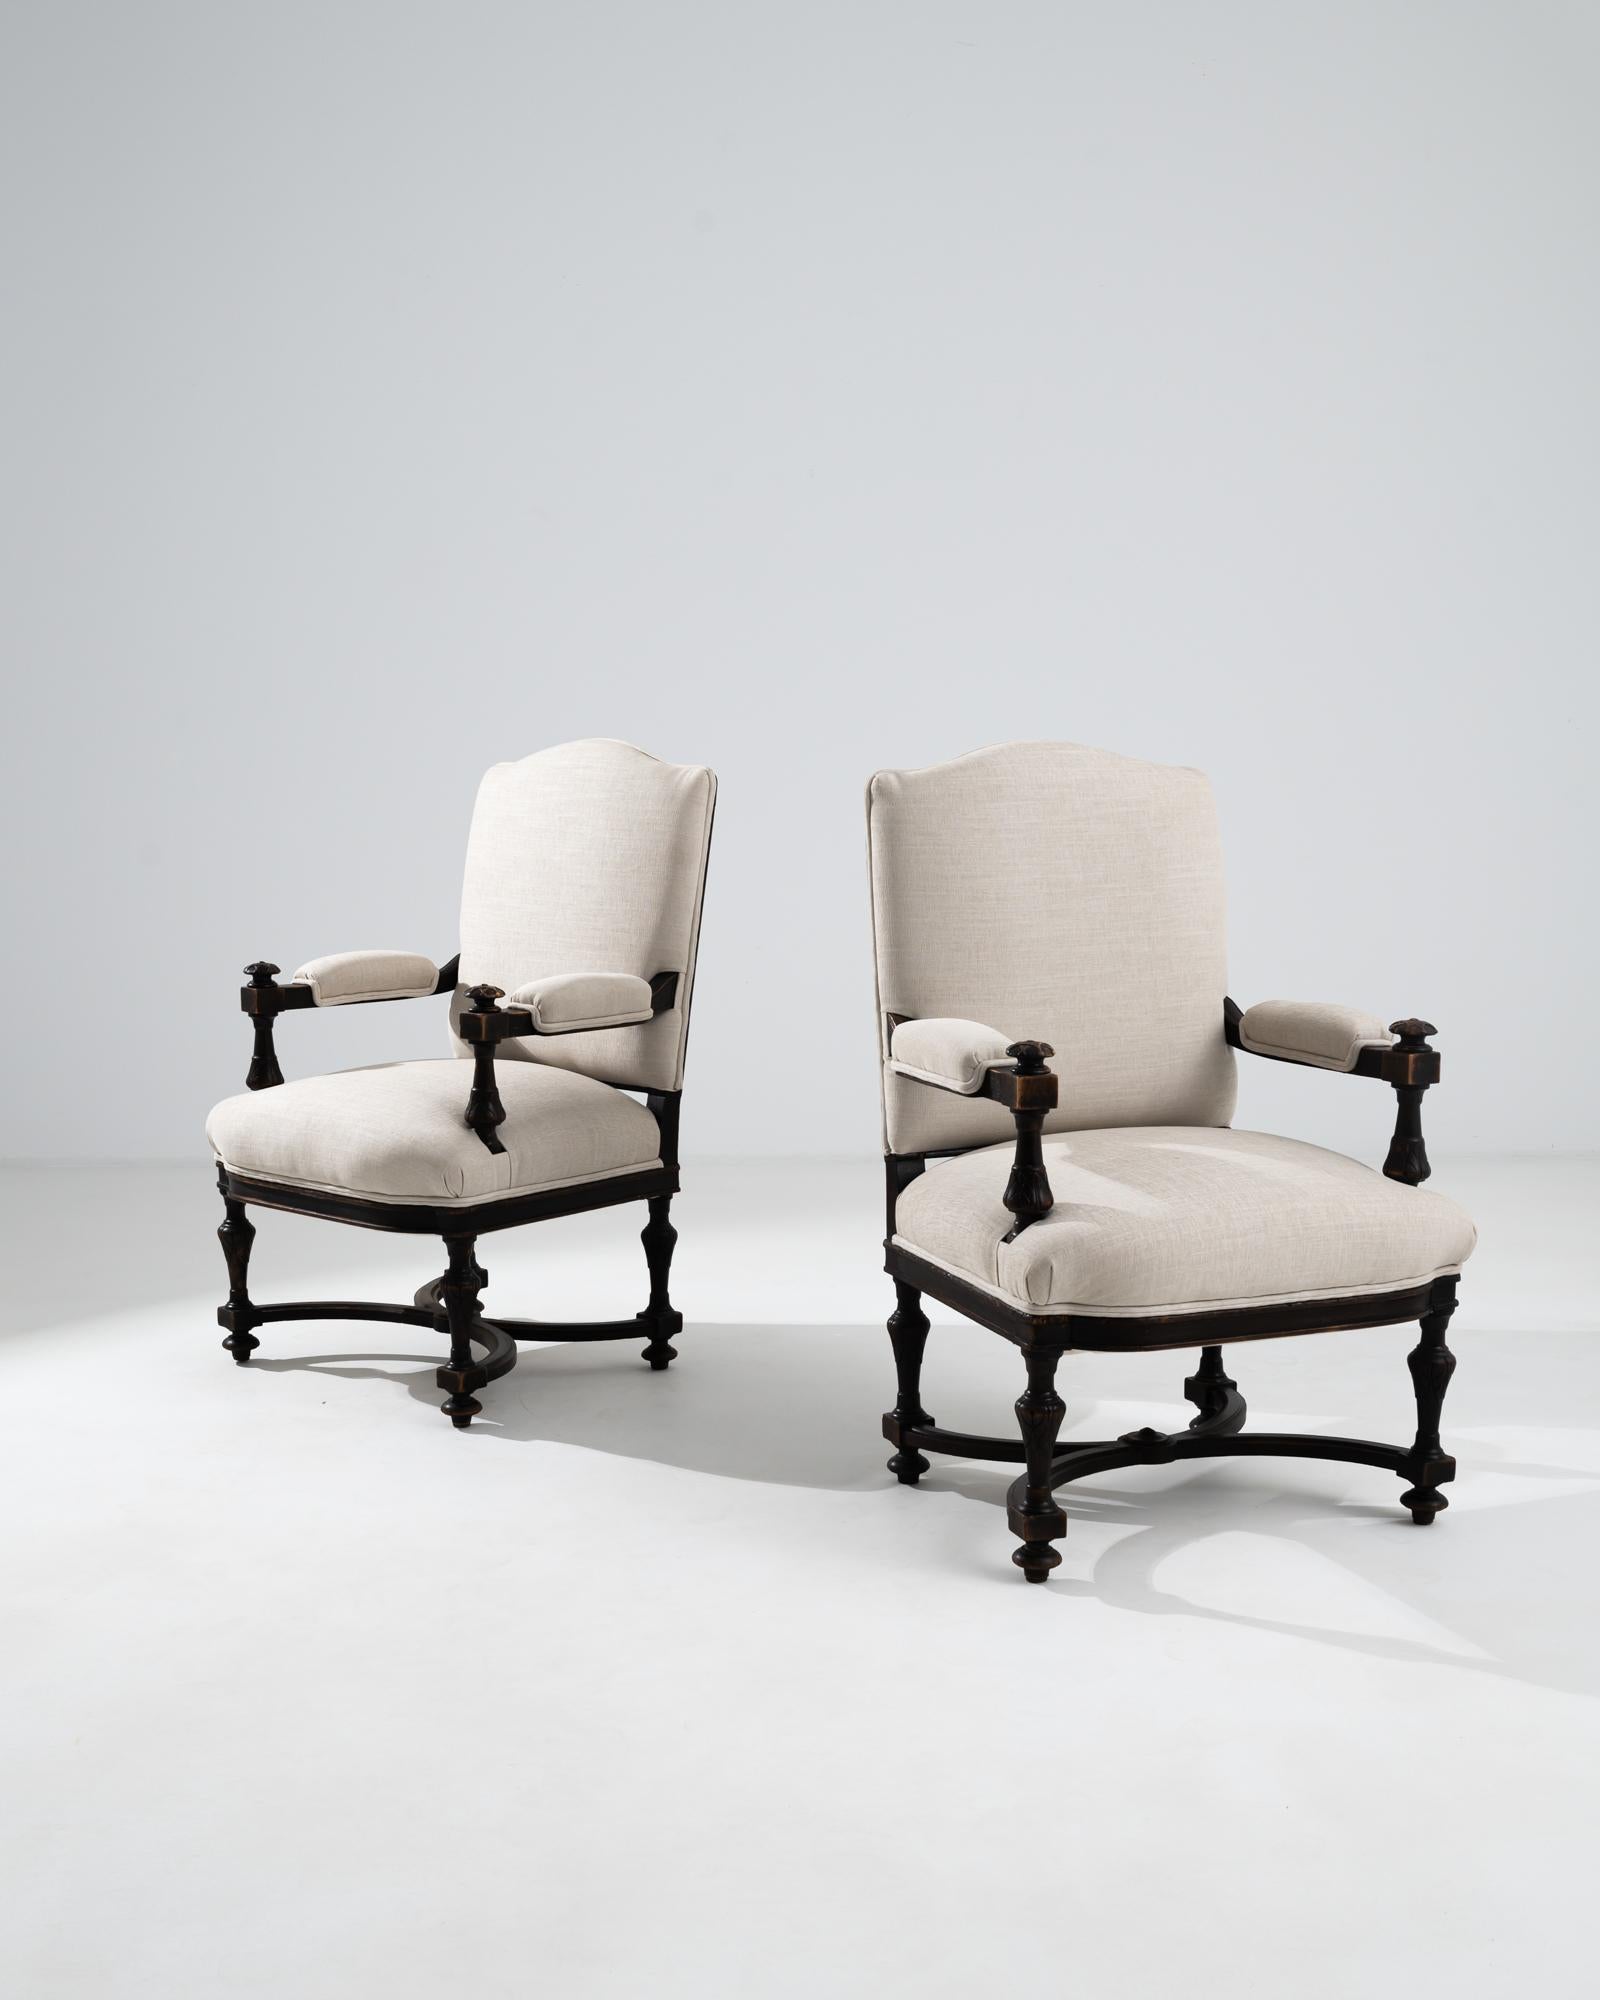 French Provincial 19th Century French Upholstered Armchairs, a Pair